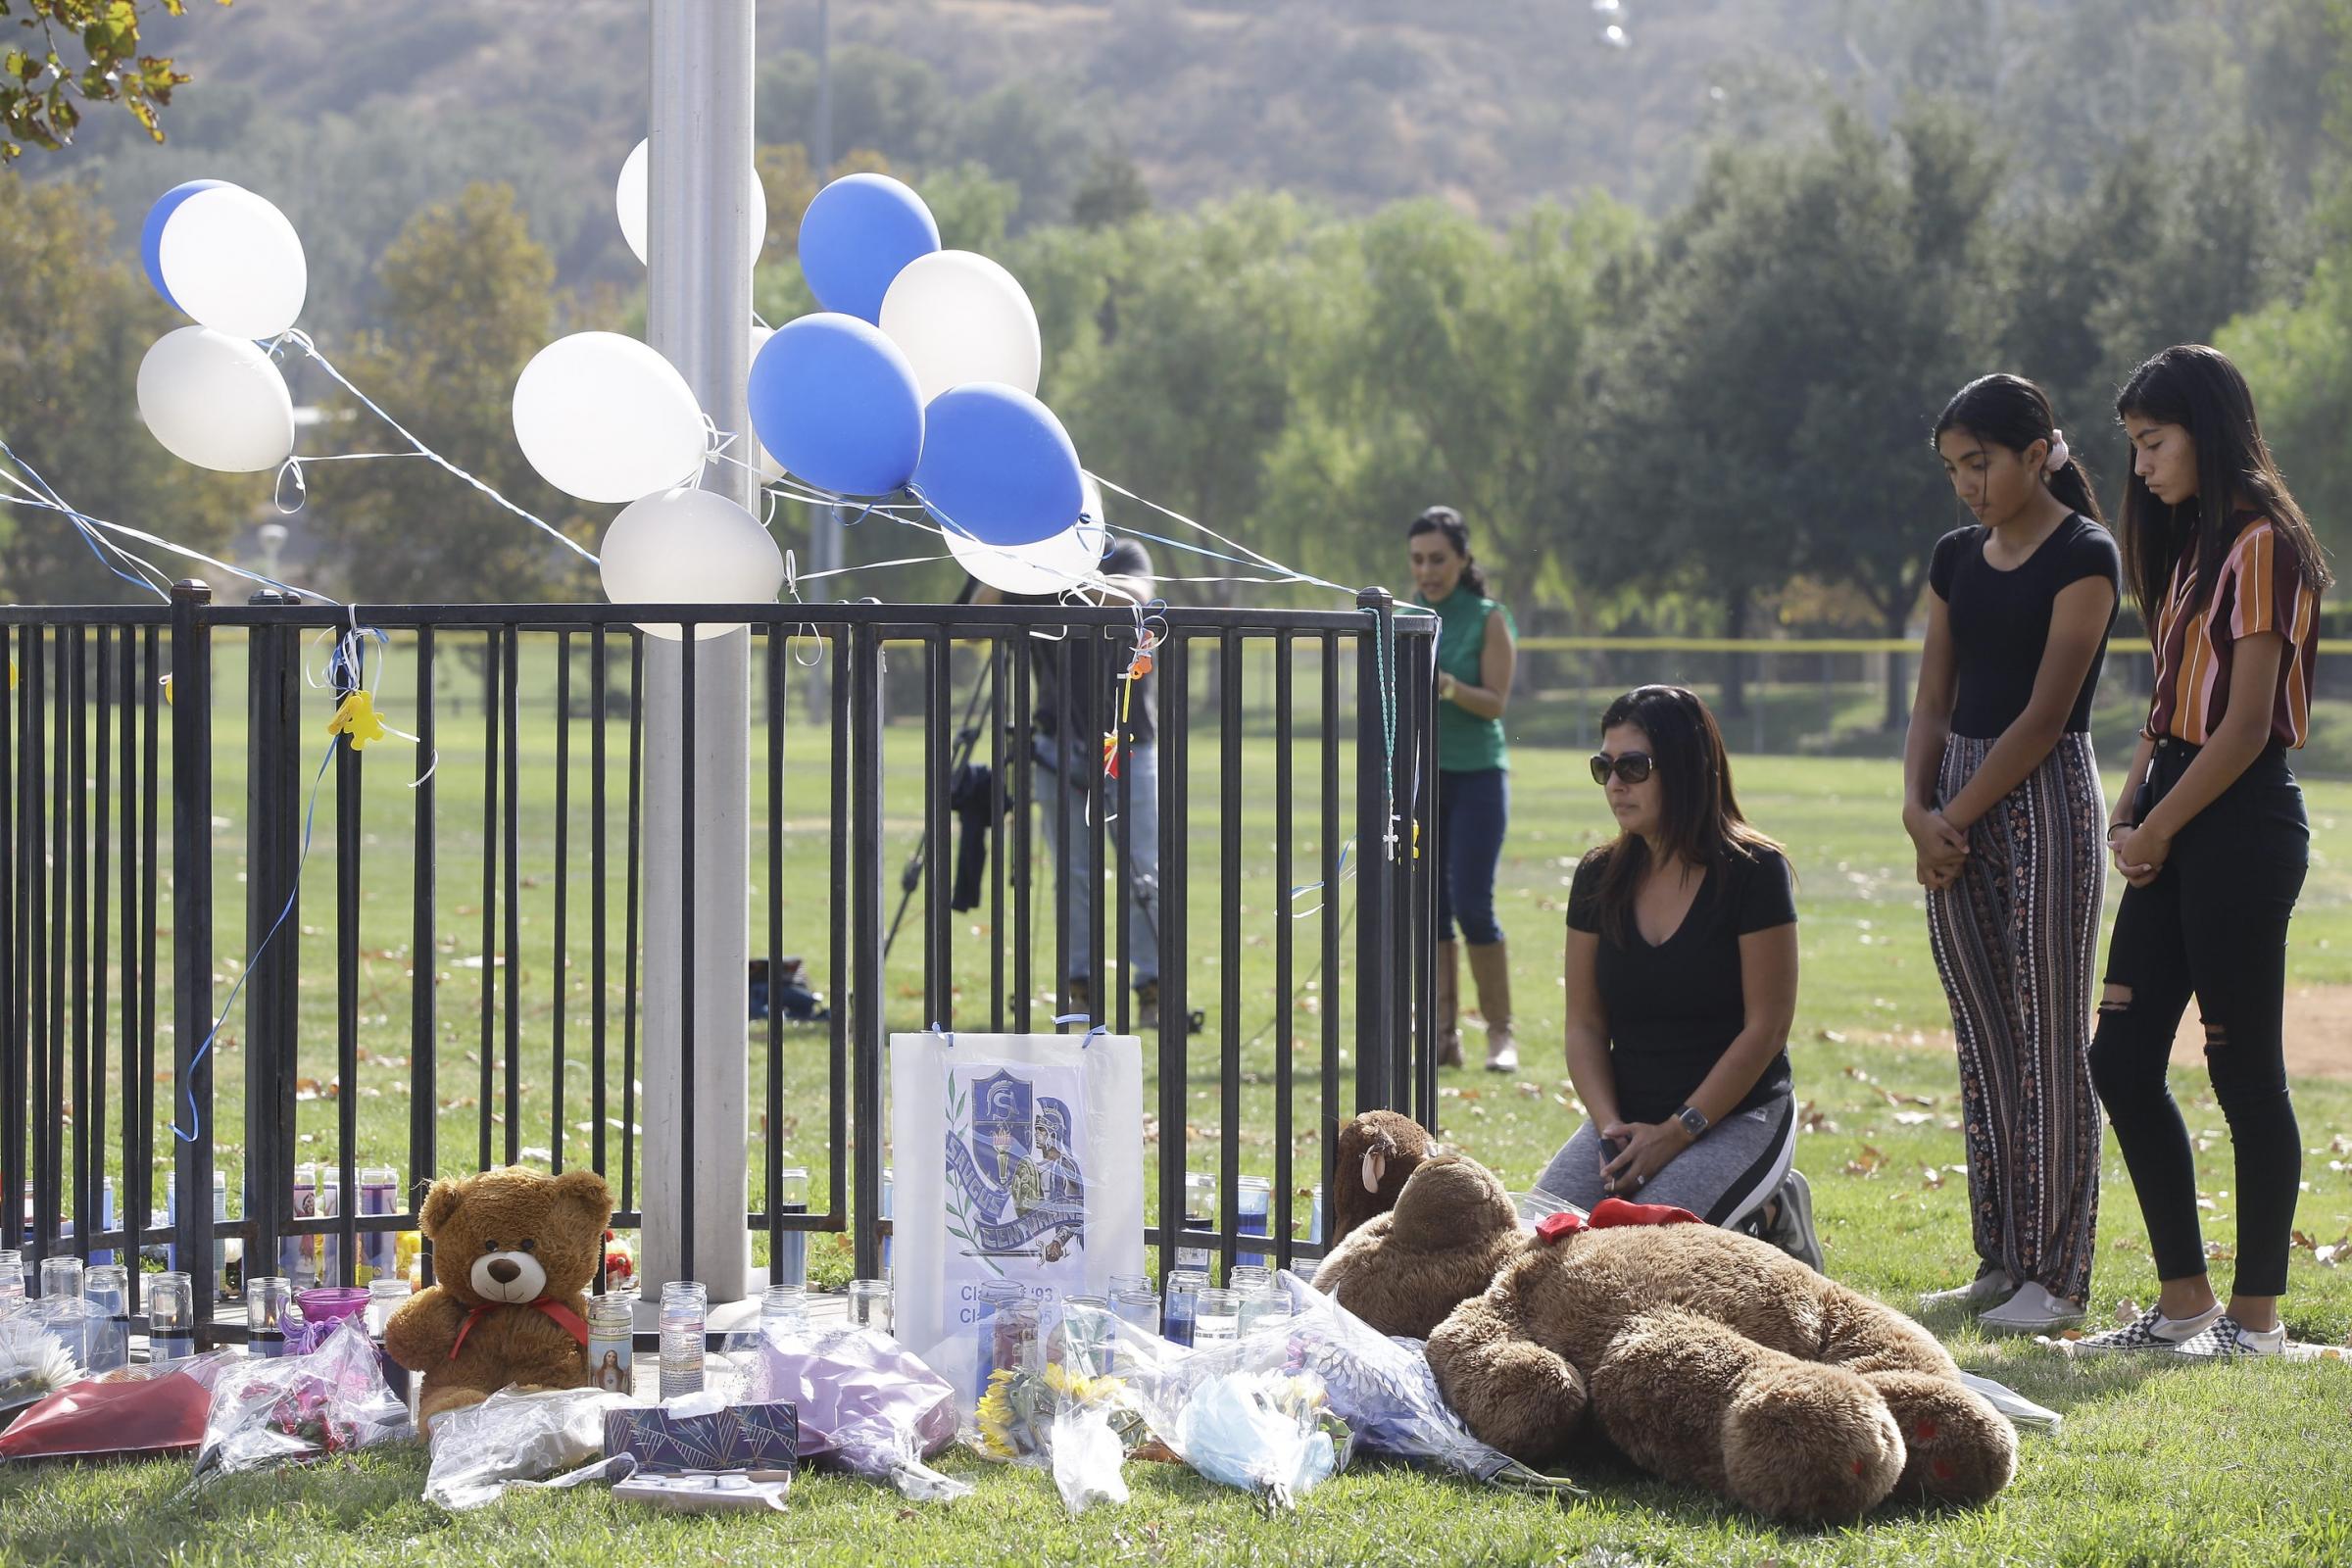 Teenager who killed two in California shooting dies in hospital - Ealing Times